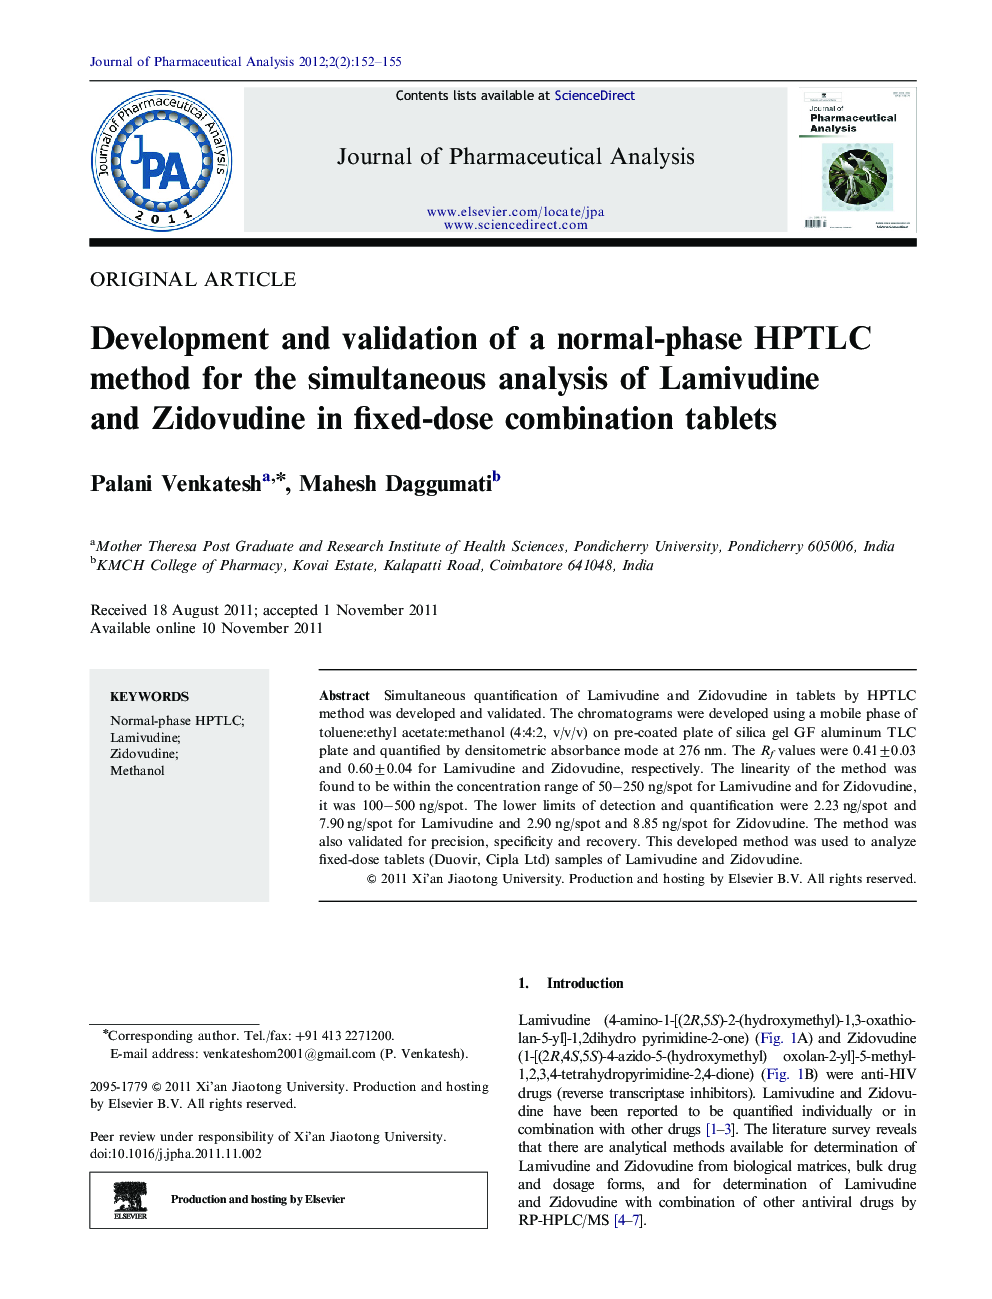 Development and validation of a normal-phase HPTLC method for the simultaneous analysis of Lamivudine and Zidovudine in fixed-dose combination tablets